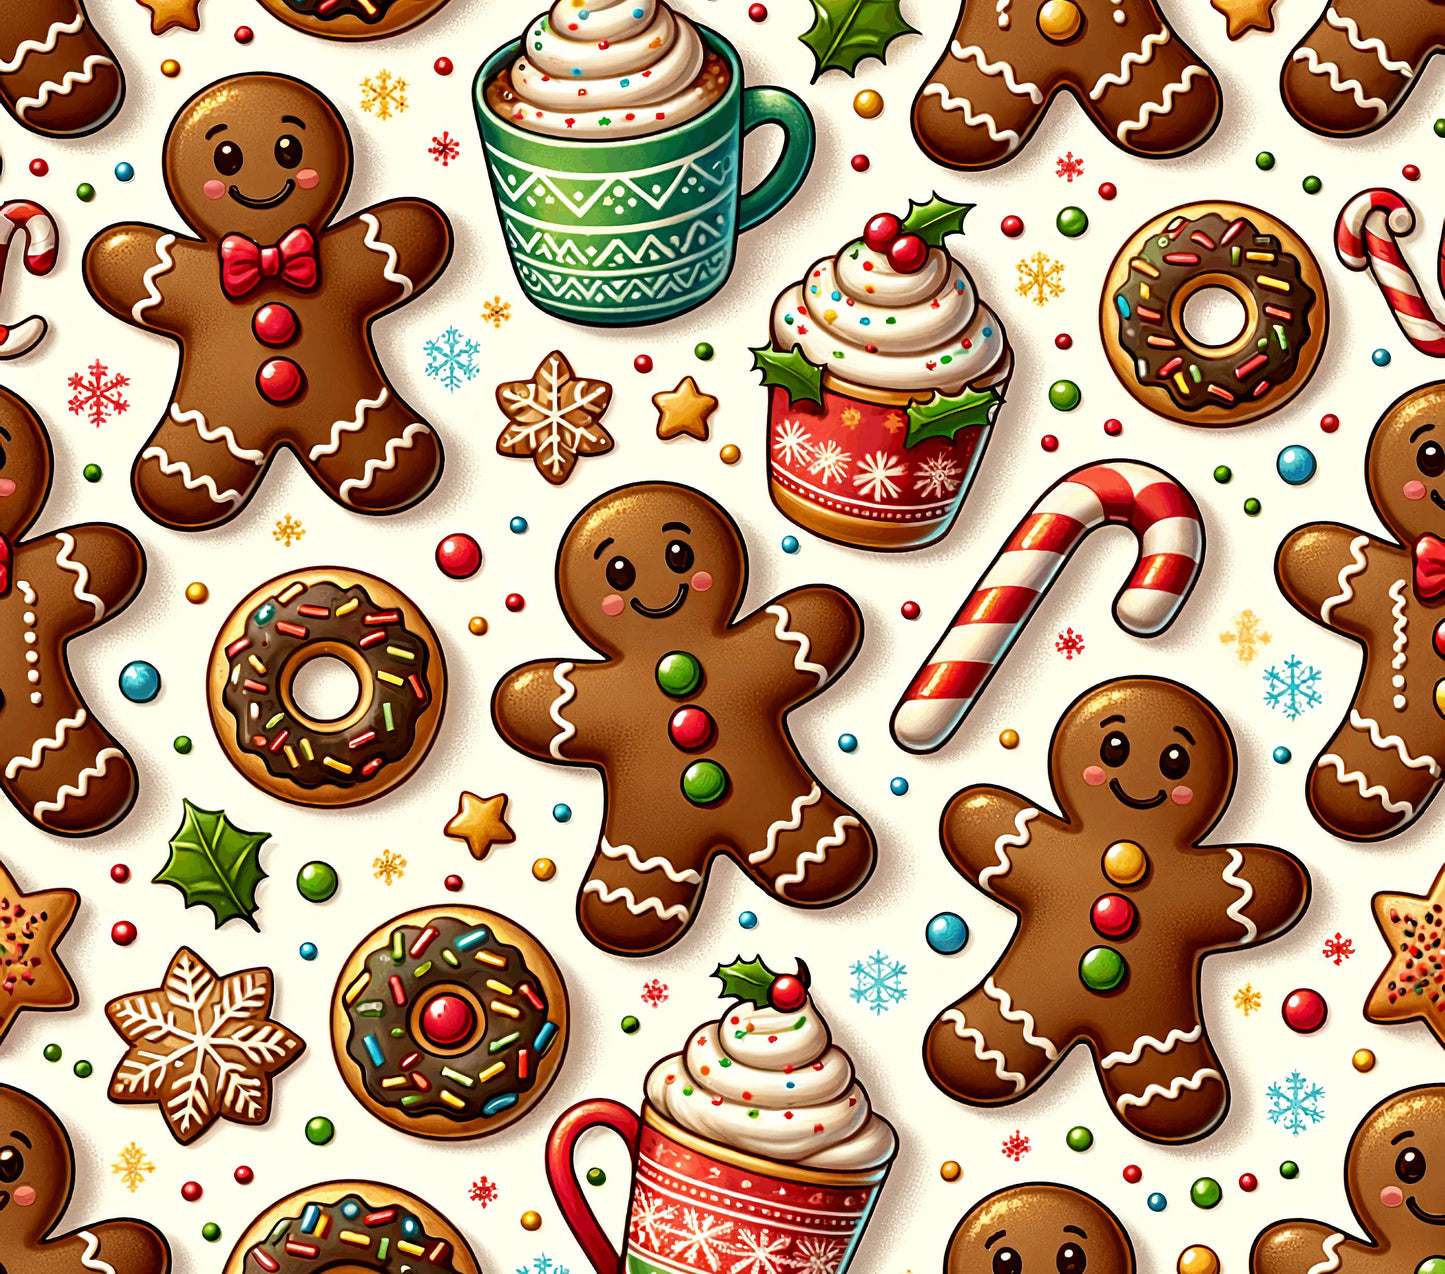 GINGERBREAD MAN COOKIES AND DONUTS